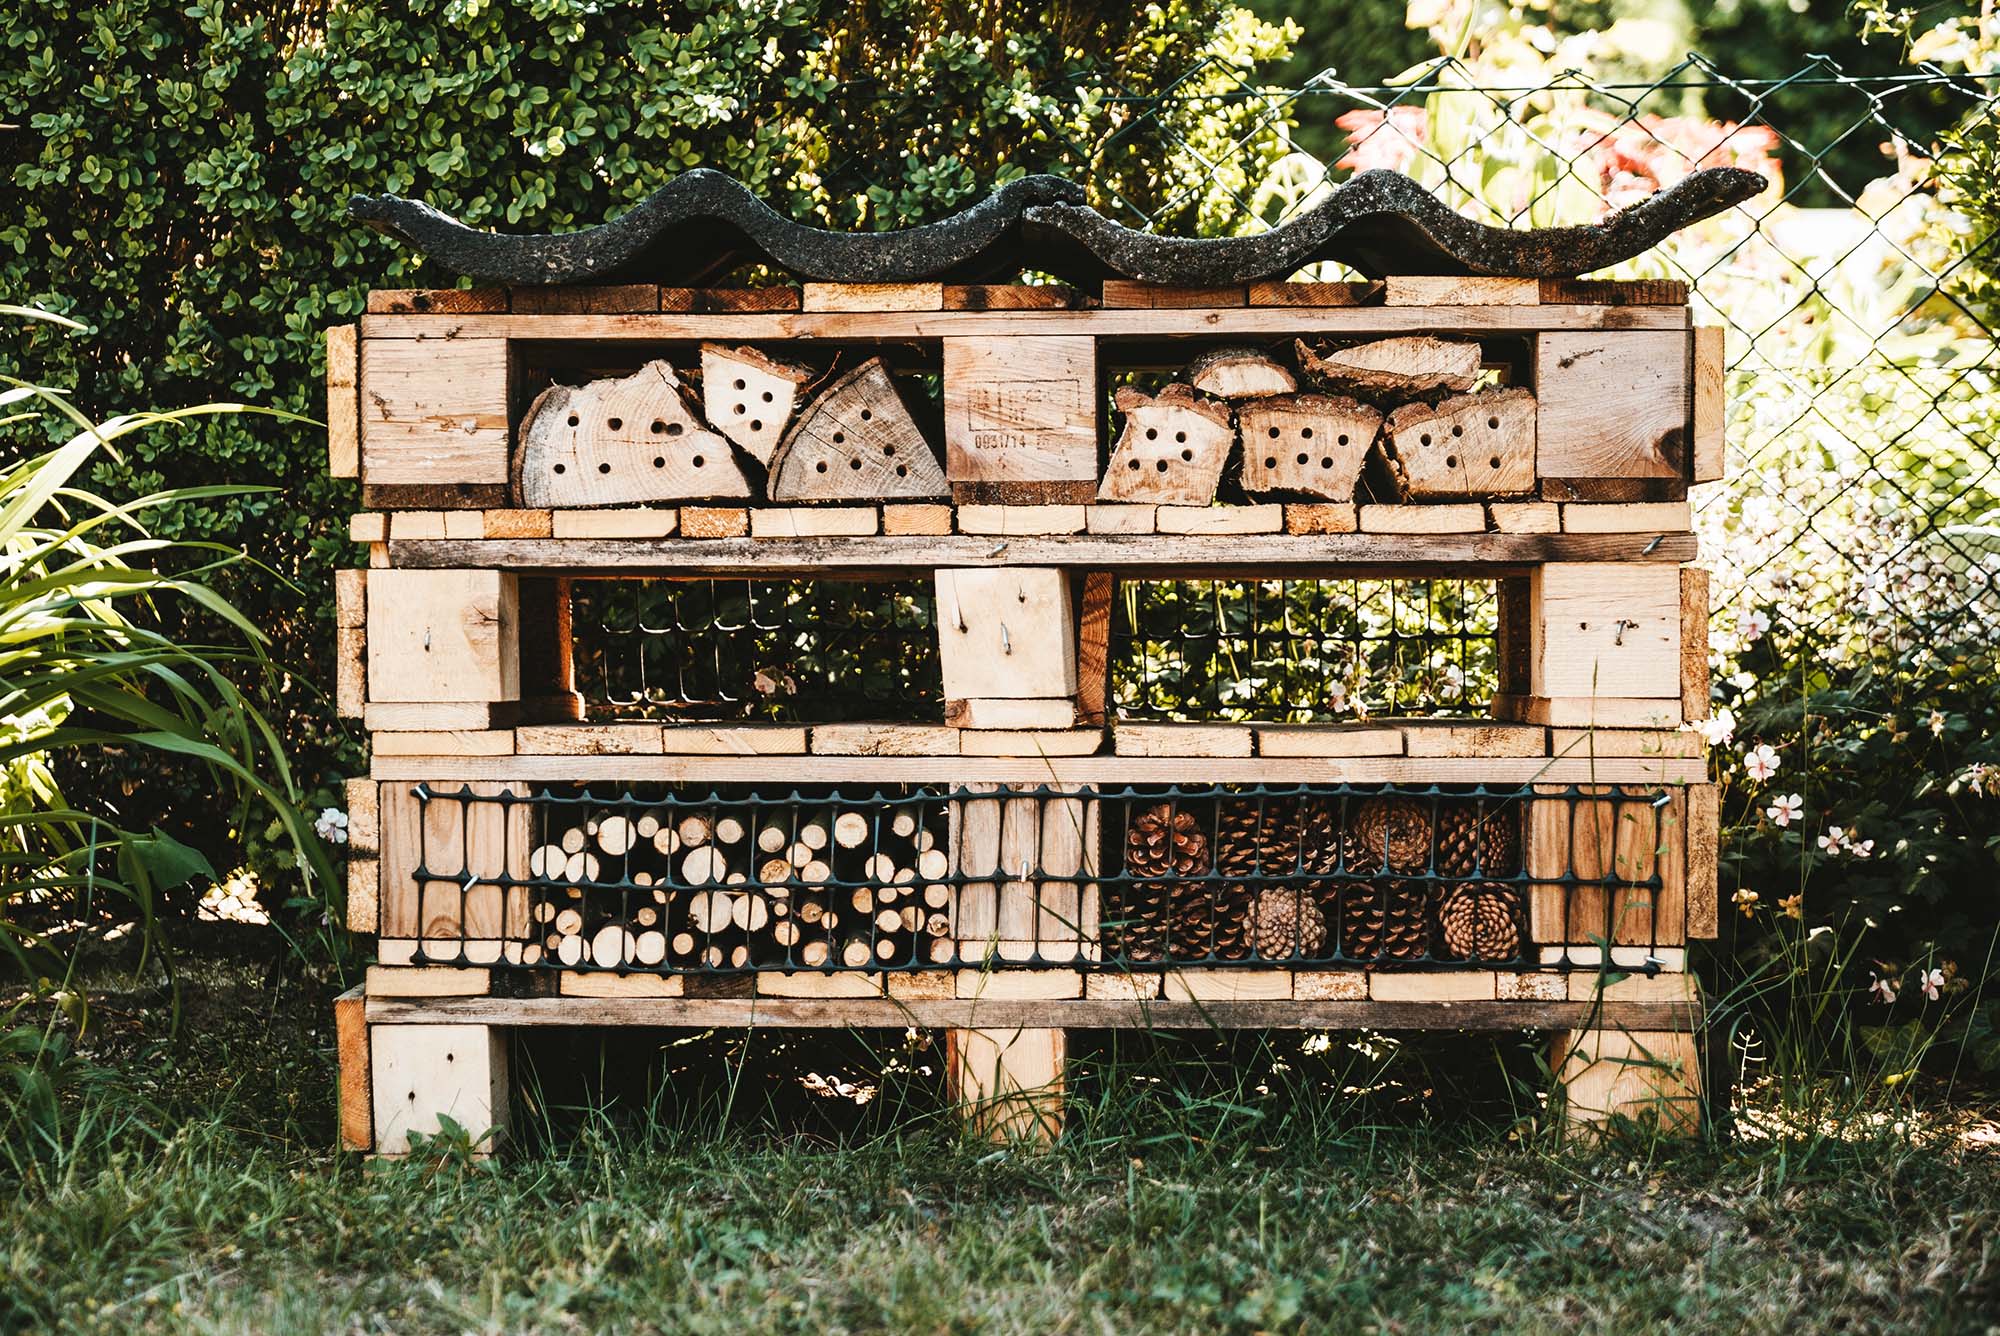 A large bee hotel with stacks of various logs, branches and pinecones